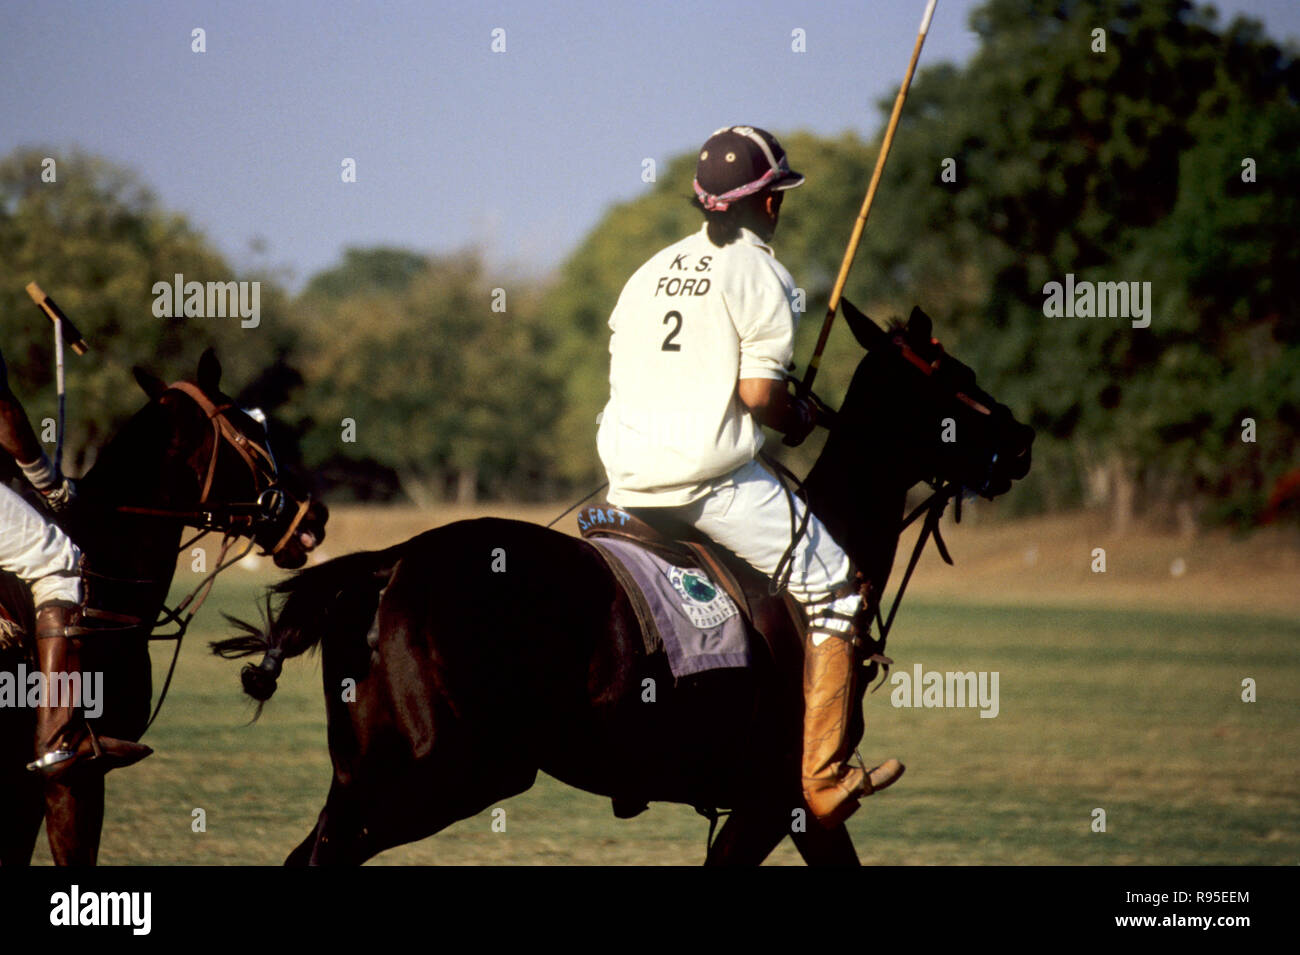 player riding on horse participate in polo match Stock Photo